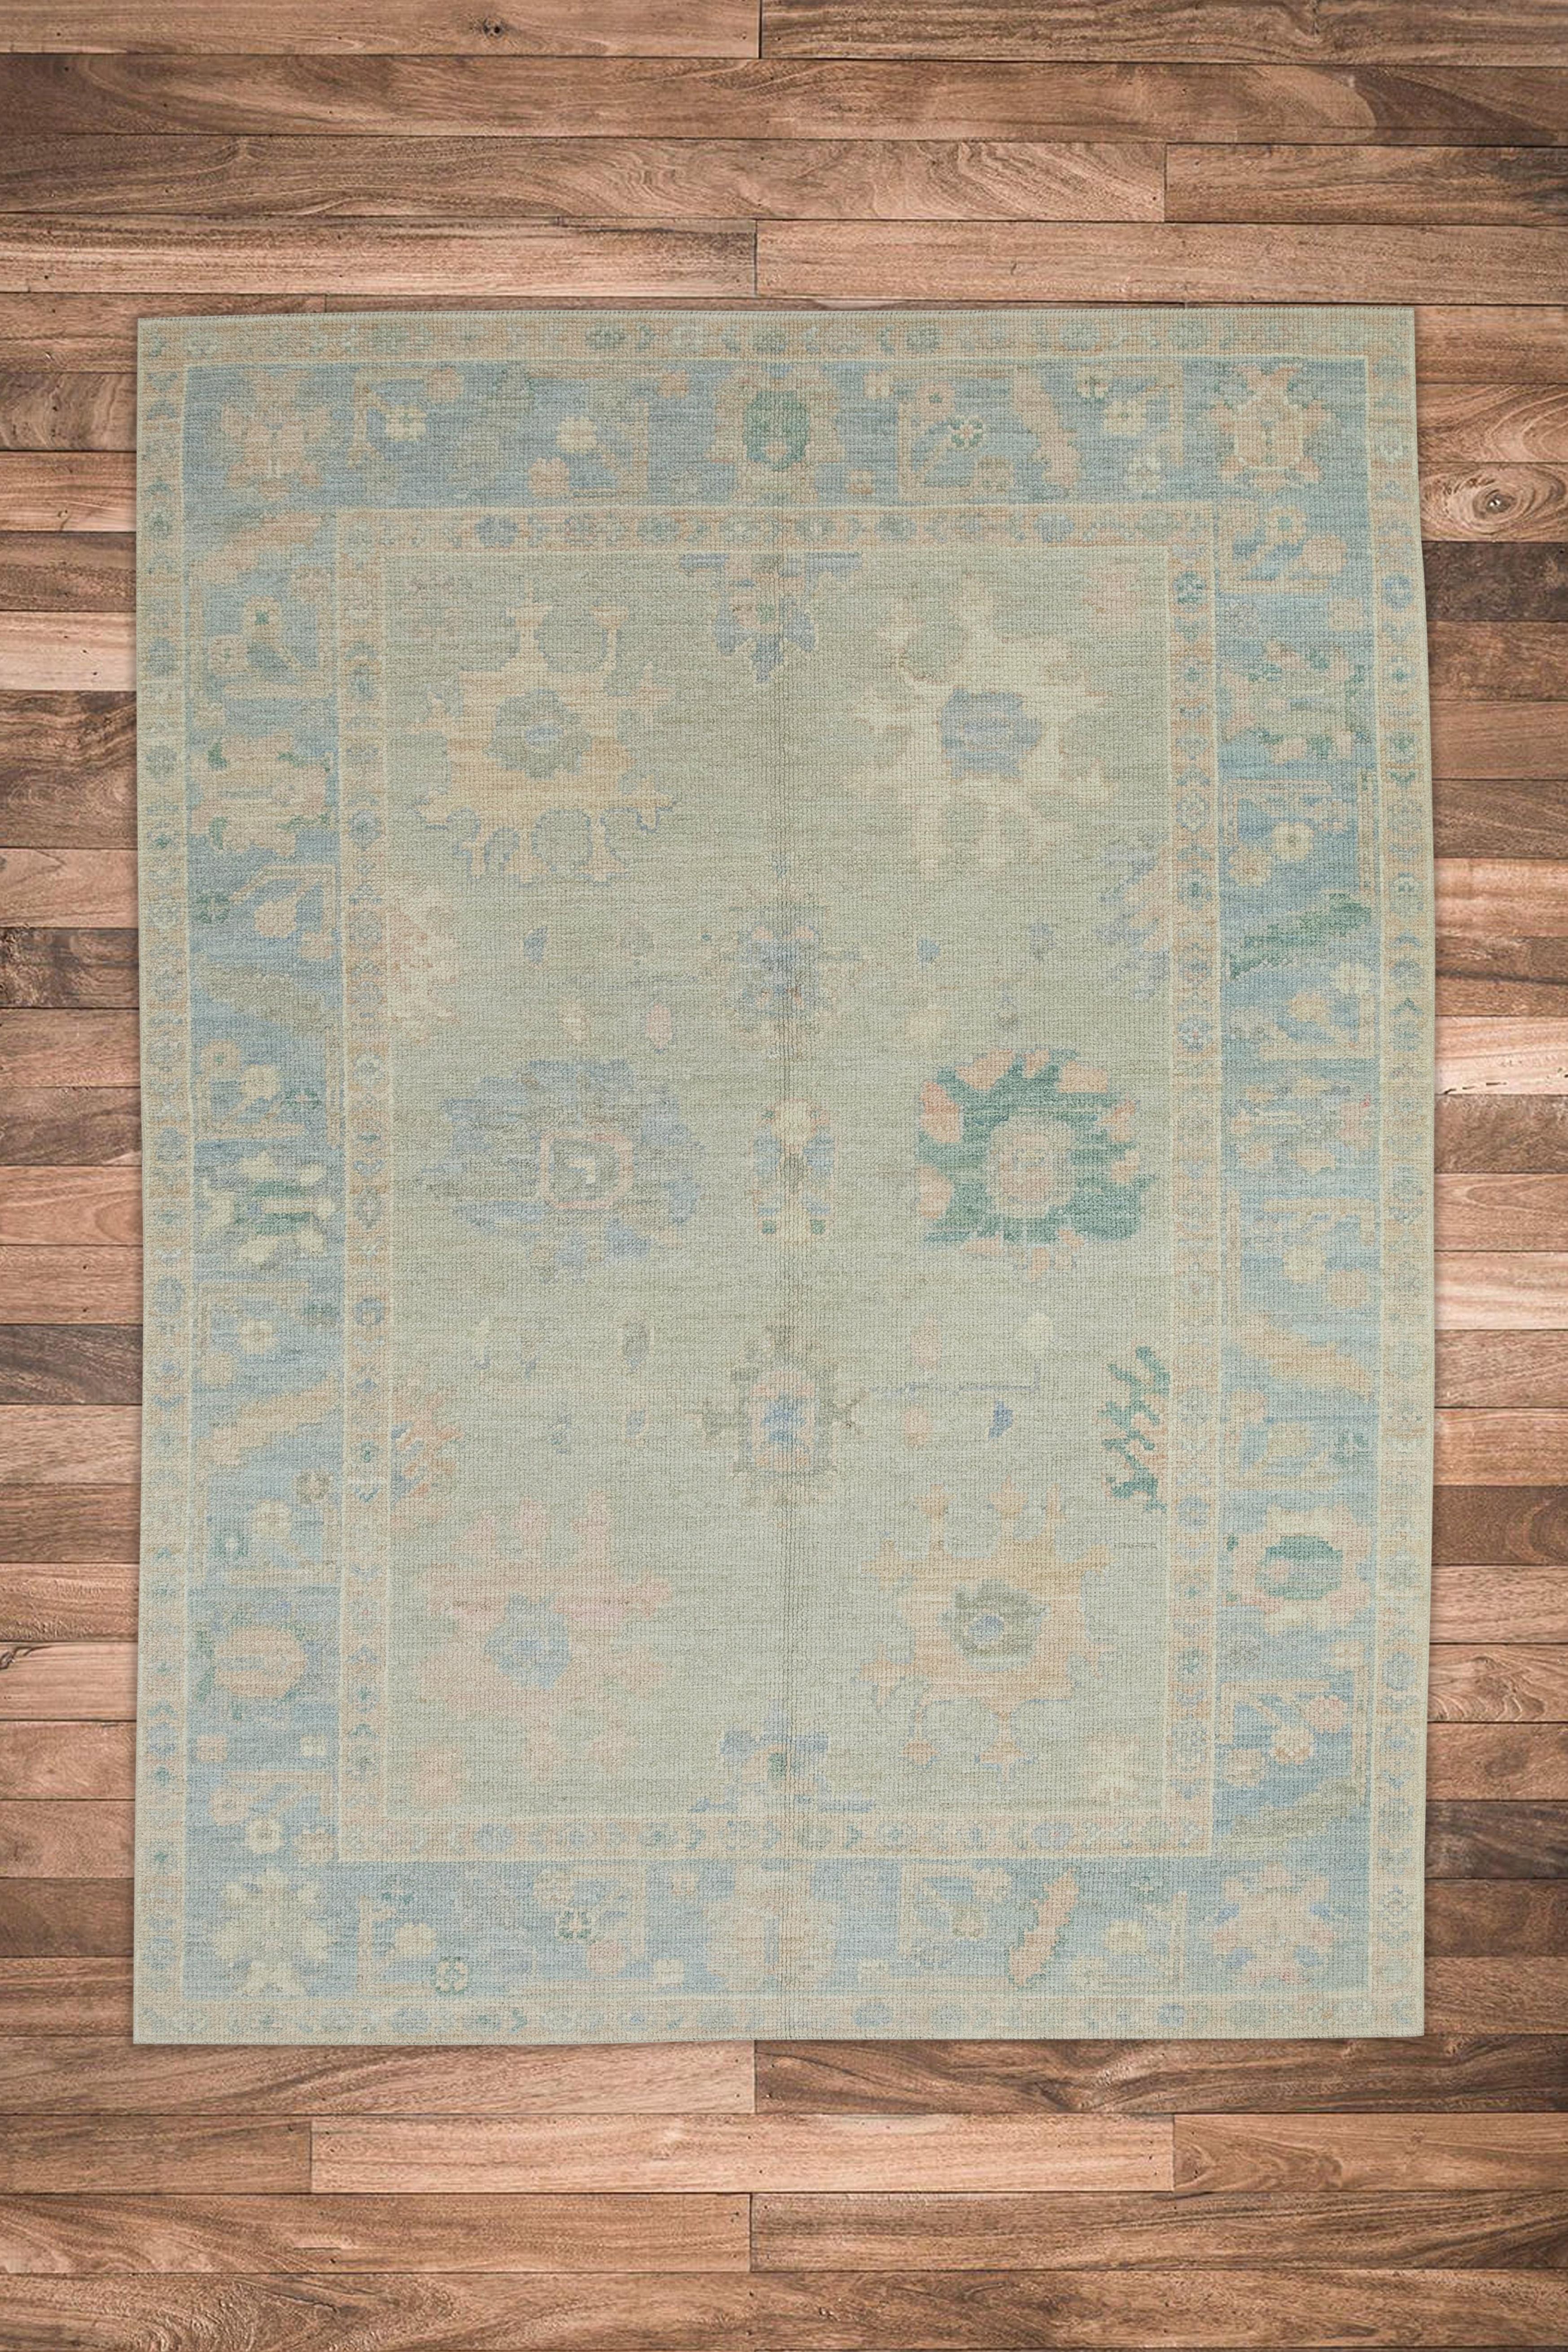 Contemporary Blue Multicolor Floral Design Handwoven Wool Turkish Oushak Rug 4'11